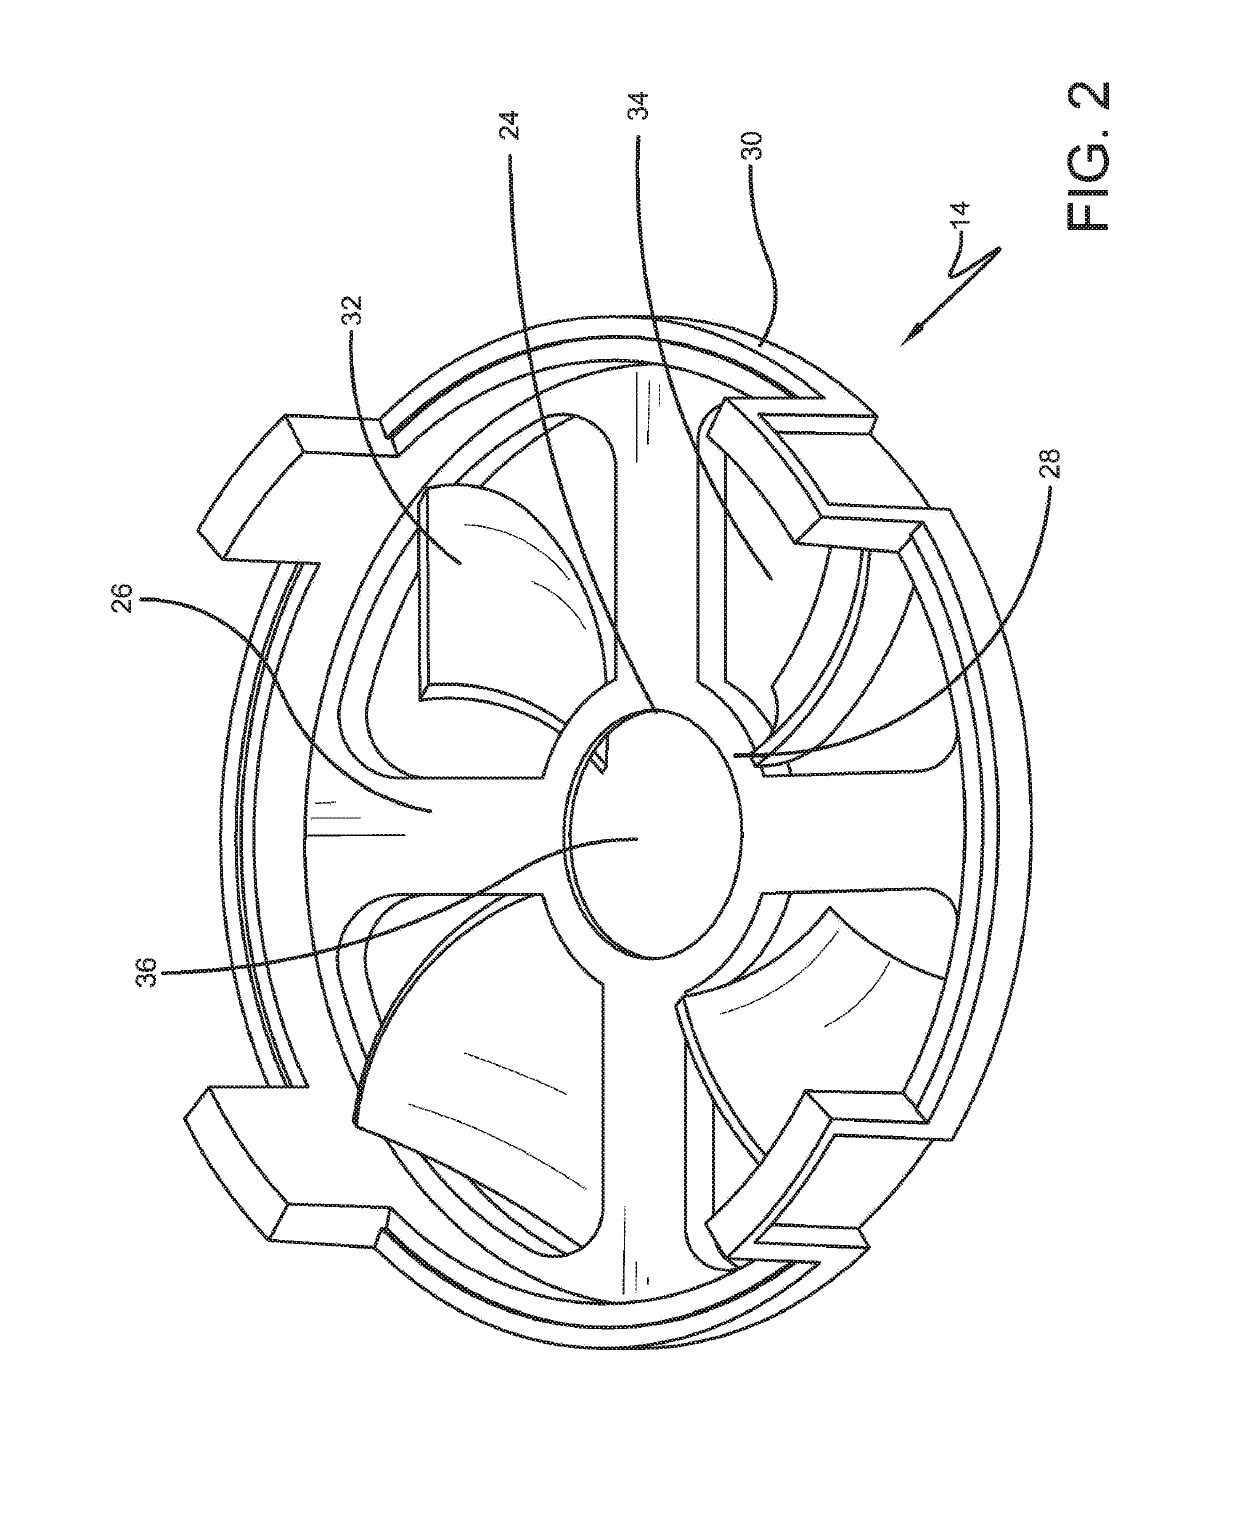 Brushless direct current motor with integrated fan